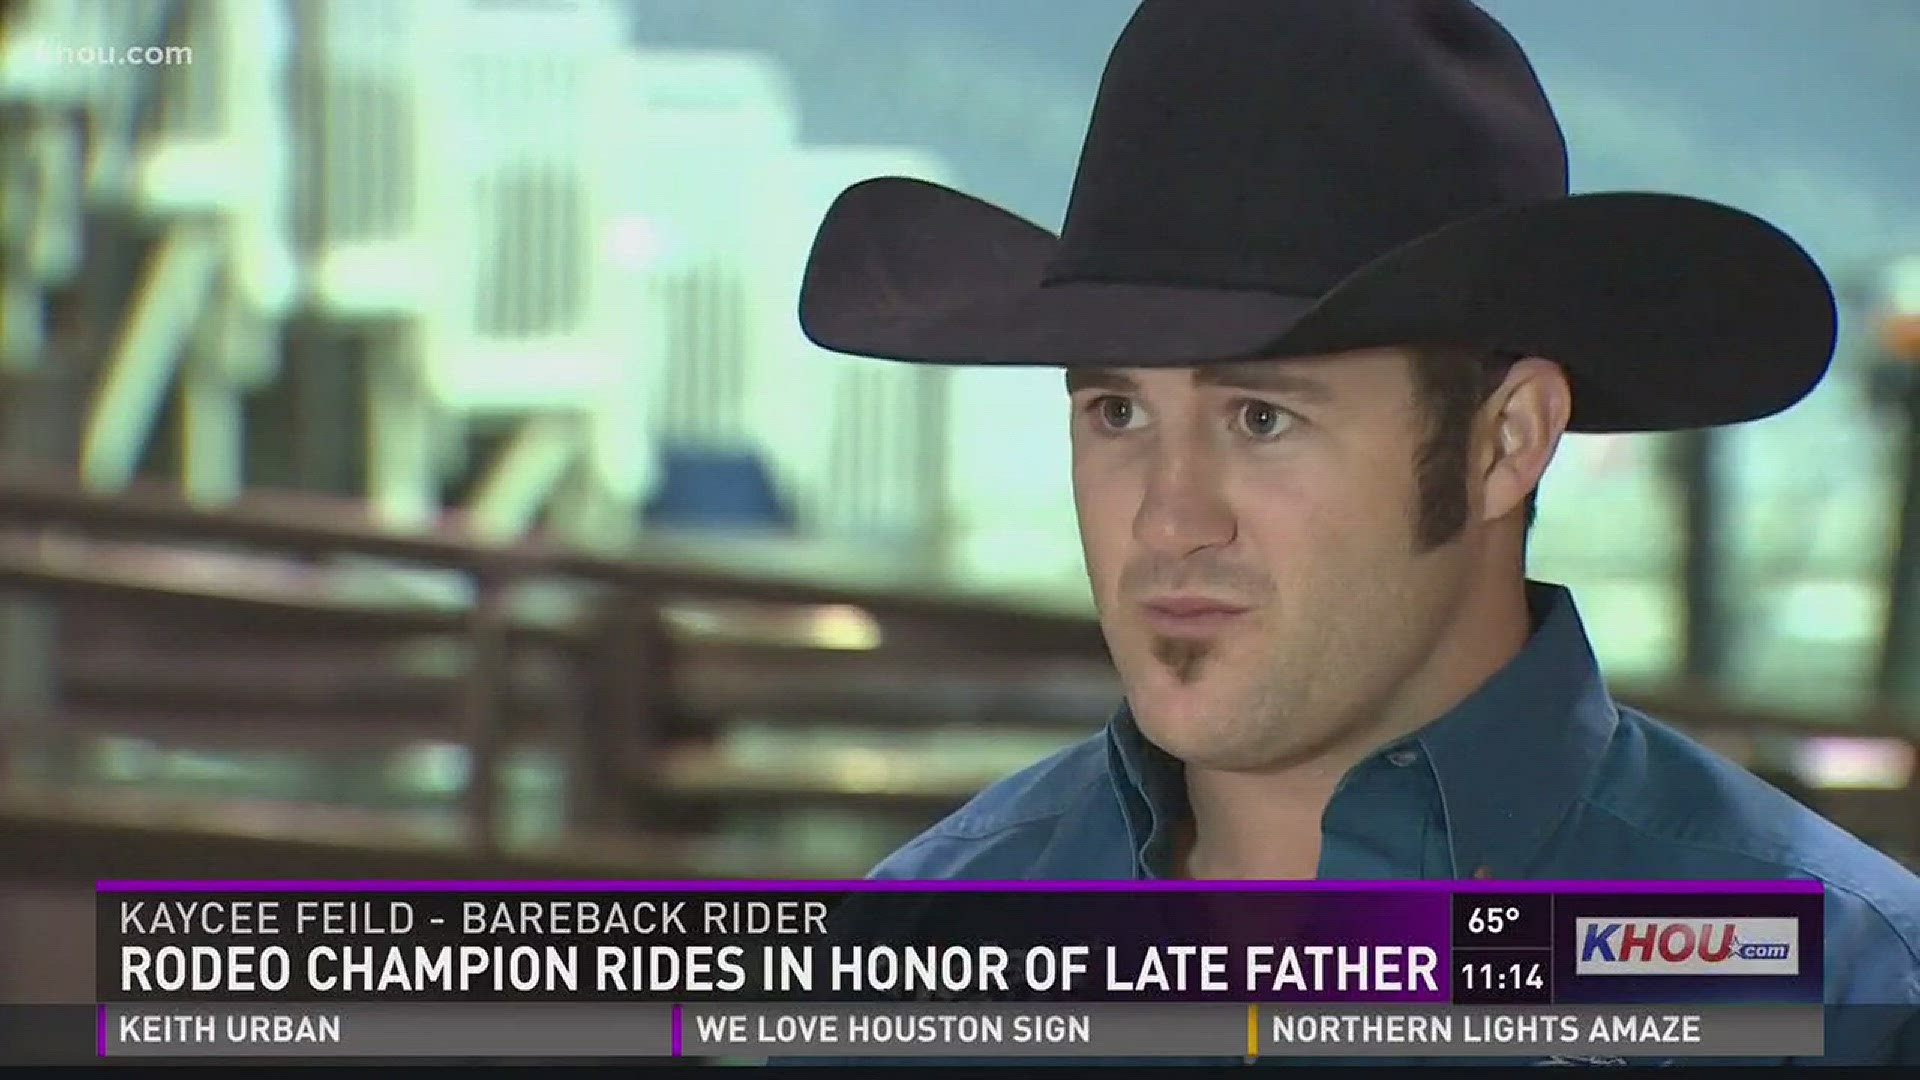 Four-time World Champion Kaycee Feild learned the sport of bareback riding from one of the world's best: his own father.